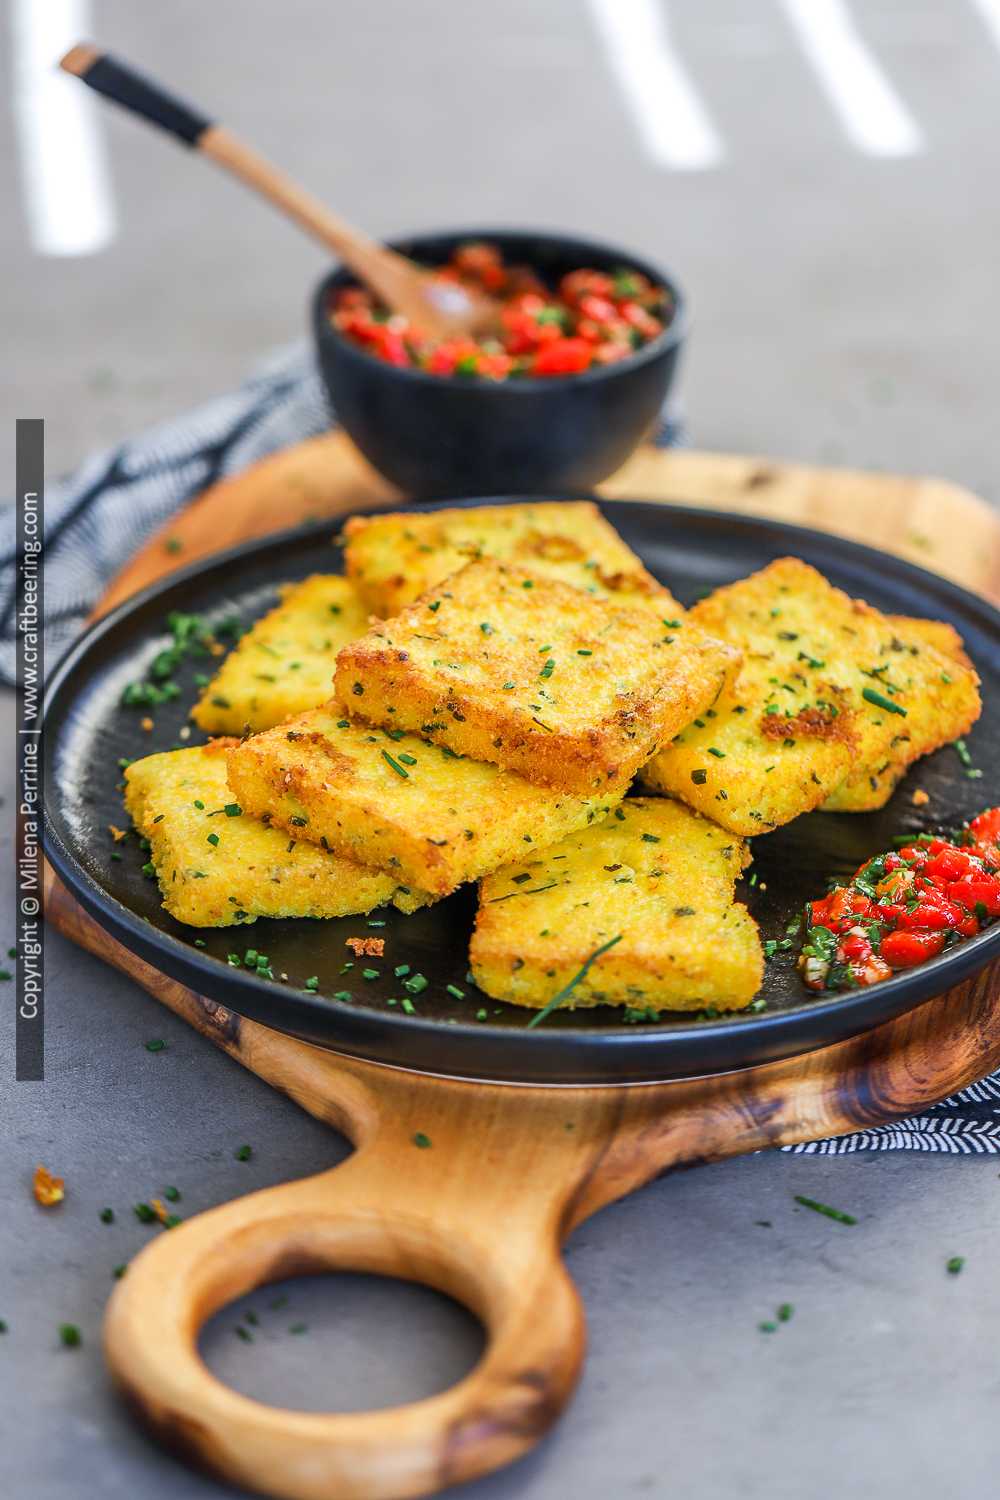 Crispy fried polenta cakes with roasted red pepper relish